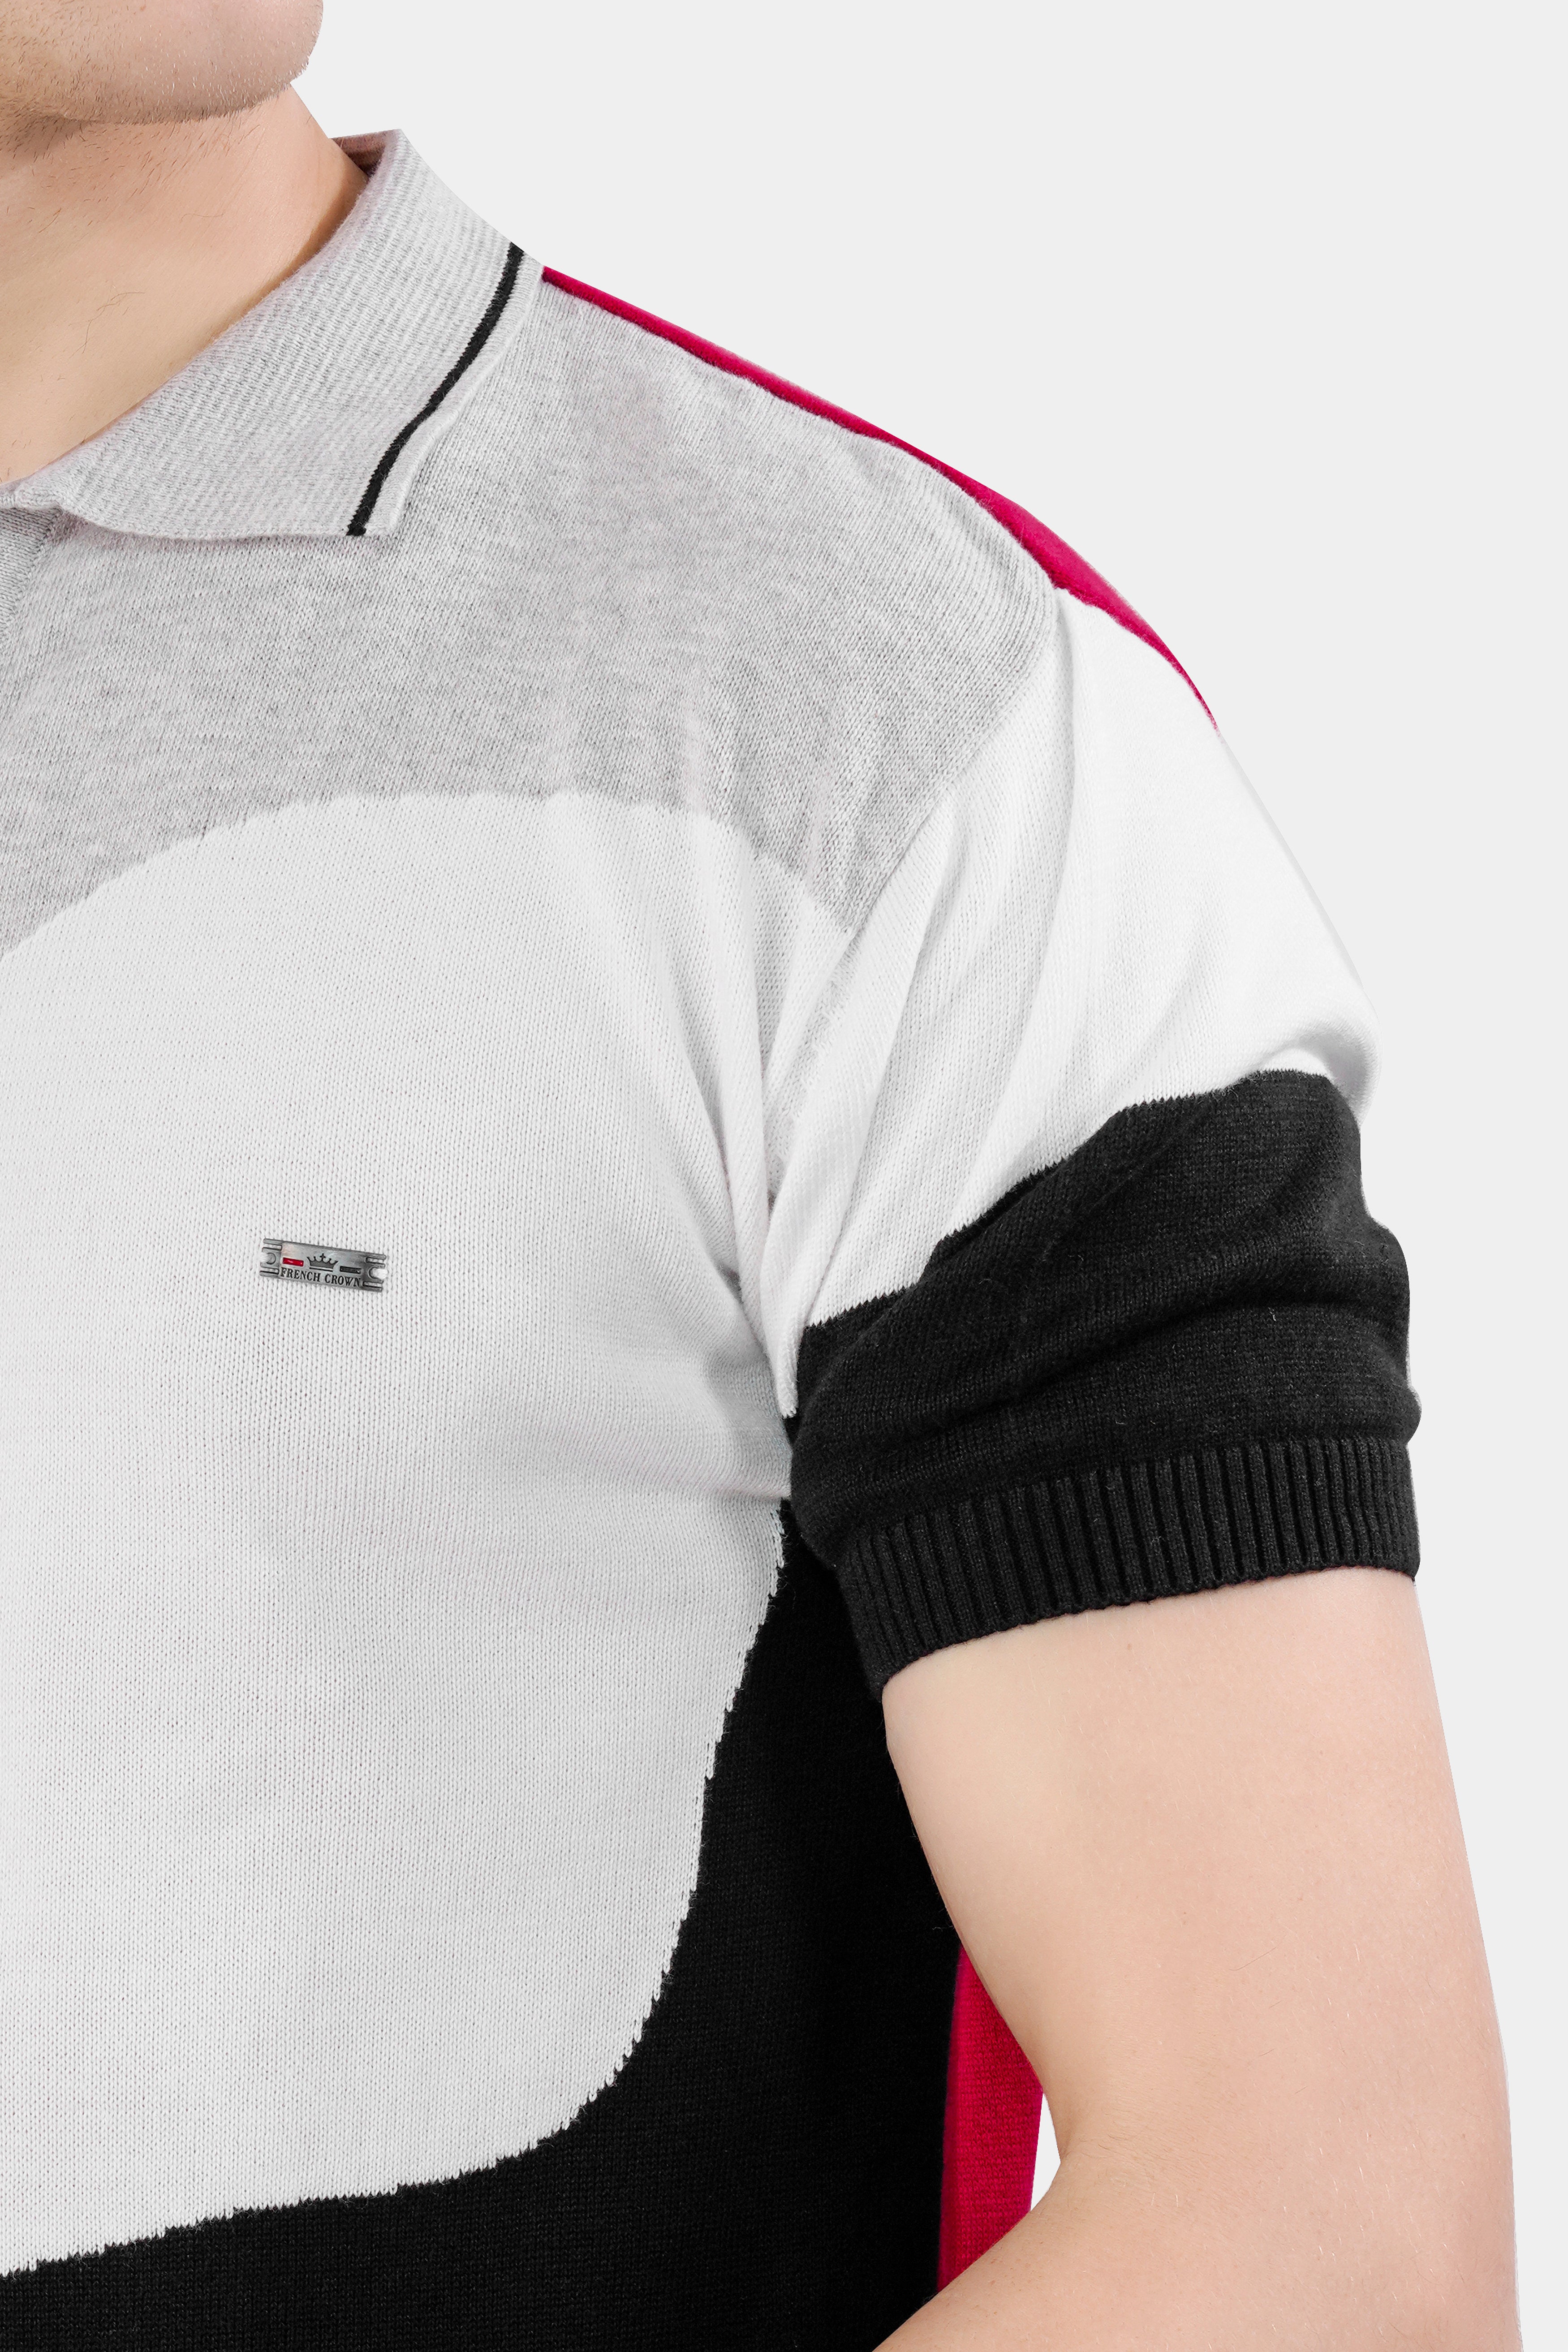 Geyser Gray with White and Black Premium Cotton Flat Knit Polo TS930-S, TS930-M, TS930-L, TS930-XL, TS930-XXL